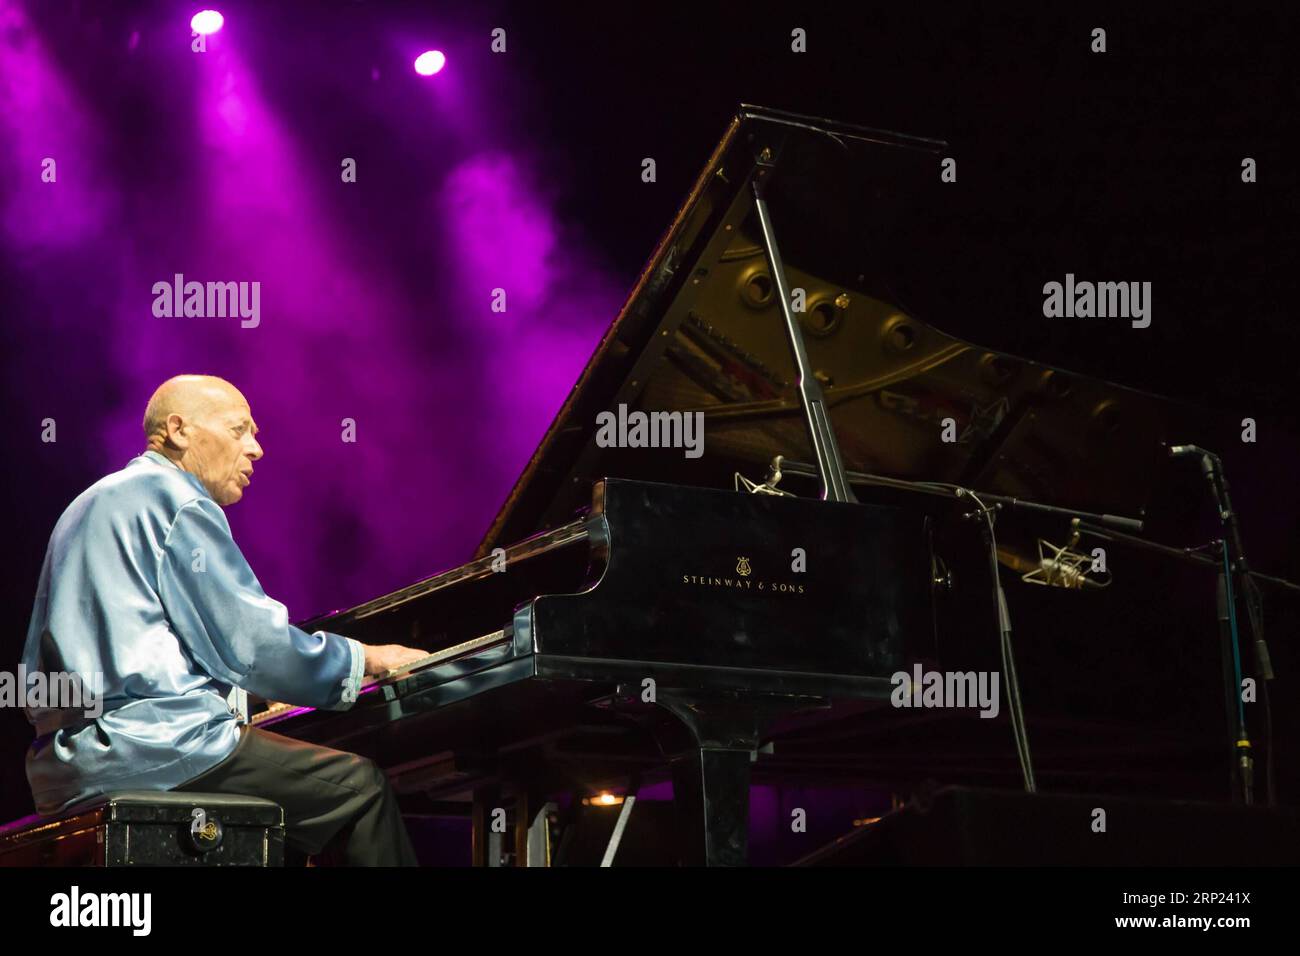 (180816) -- BUDAPEST, Aug. 16, 2018 -- Australian concert pianist David Helfgott performs during his concert in Papp Laszlo Sports Arena in Budapest, Hungary on Aug. 15, 2018. )(gj) HUNGARY-BUDAPEST-MUSIC CONCERT AttilaxVolgyi PUBLICATIONxNOTxINxCHN Stock Photo